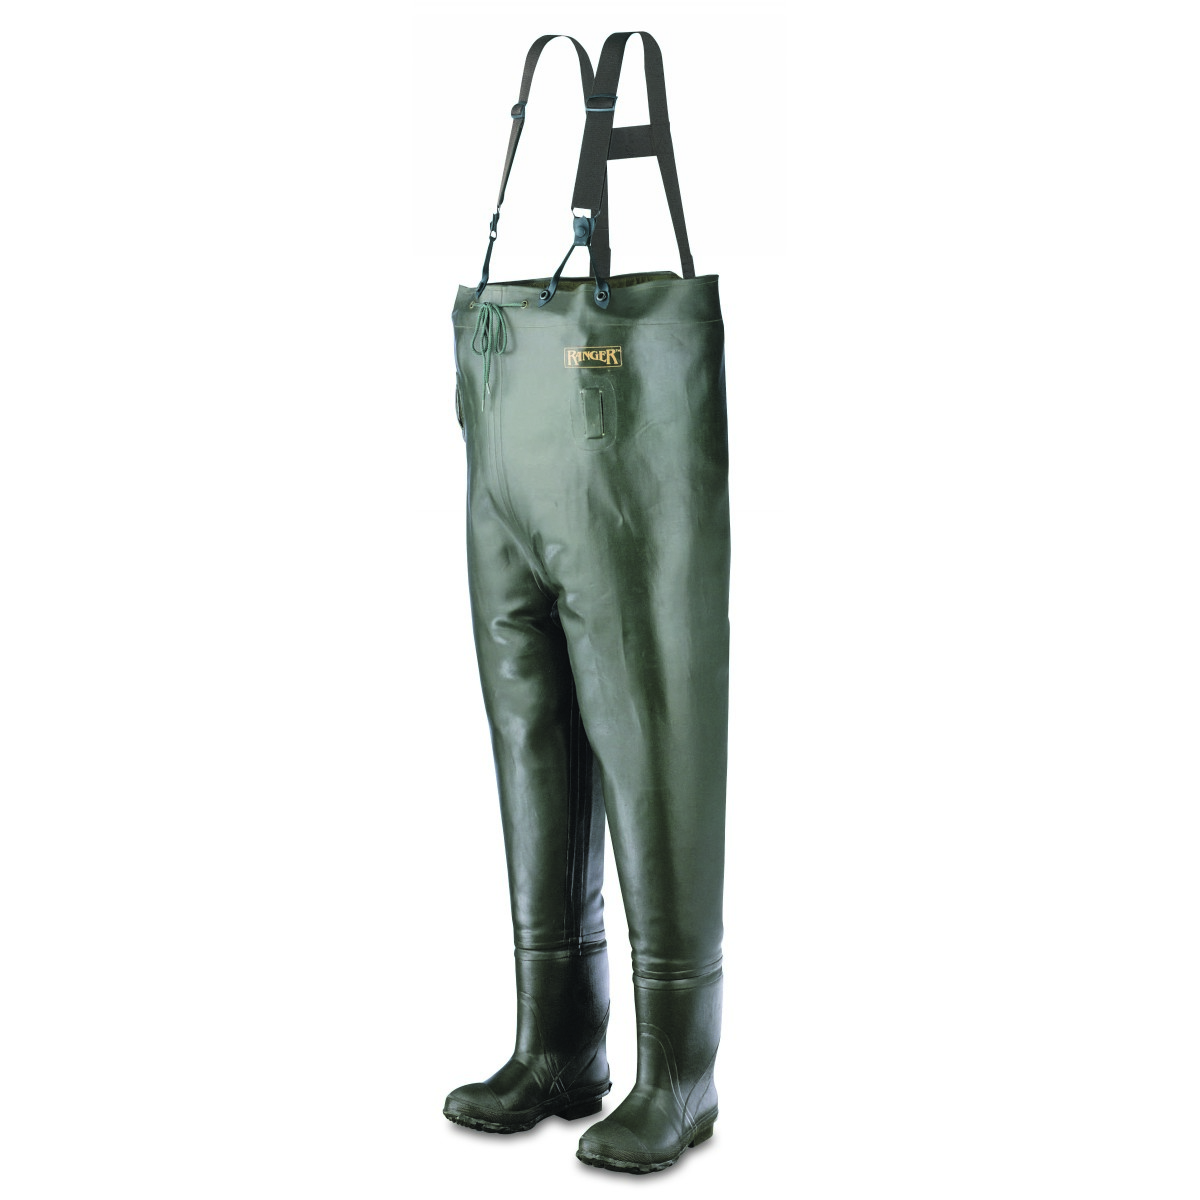 Ranger by Honeywell Men's Forest Green Chest Waders 14 65